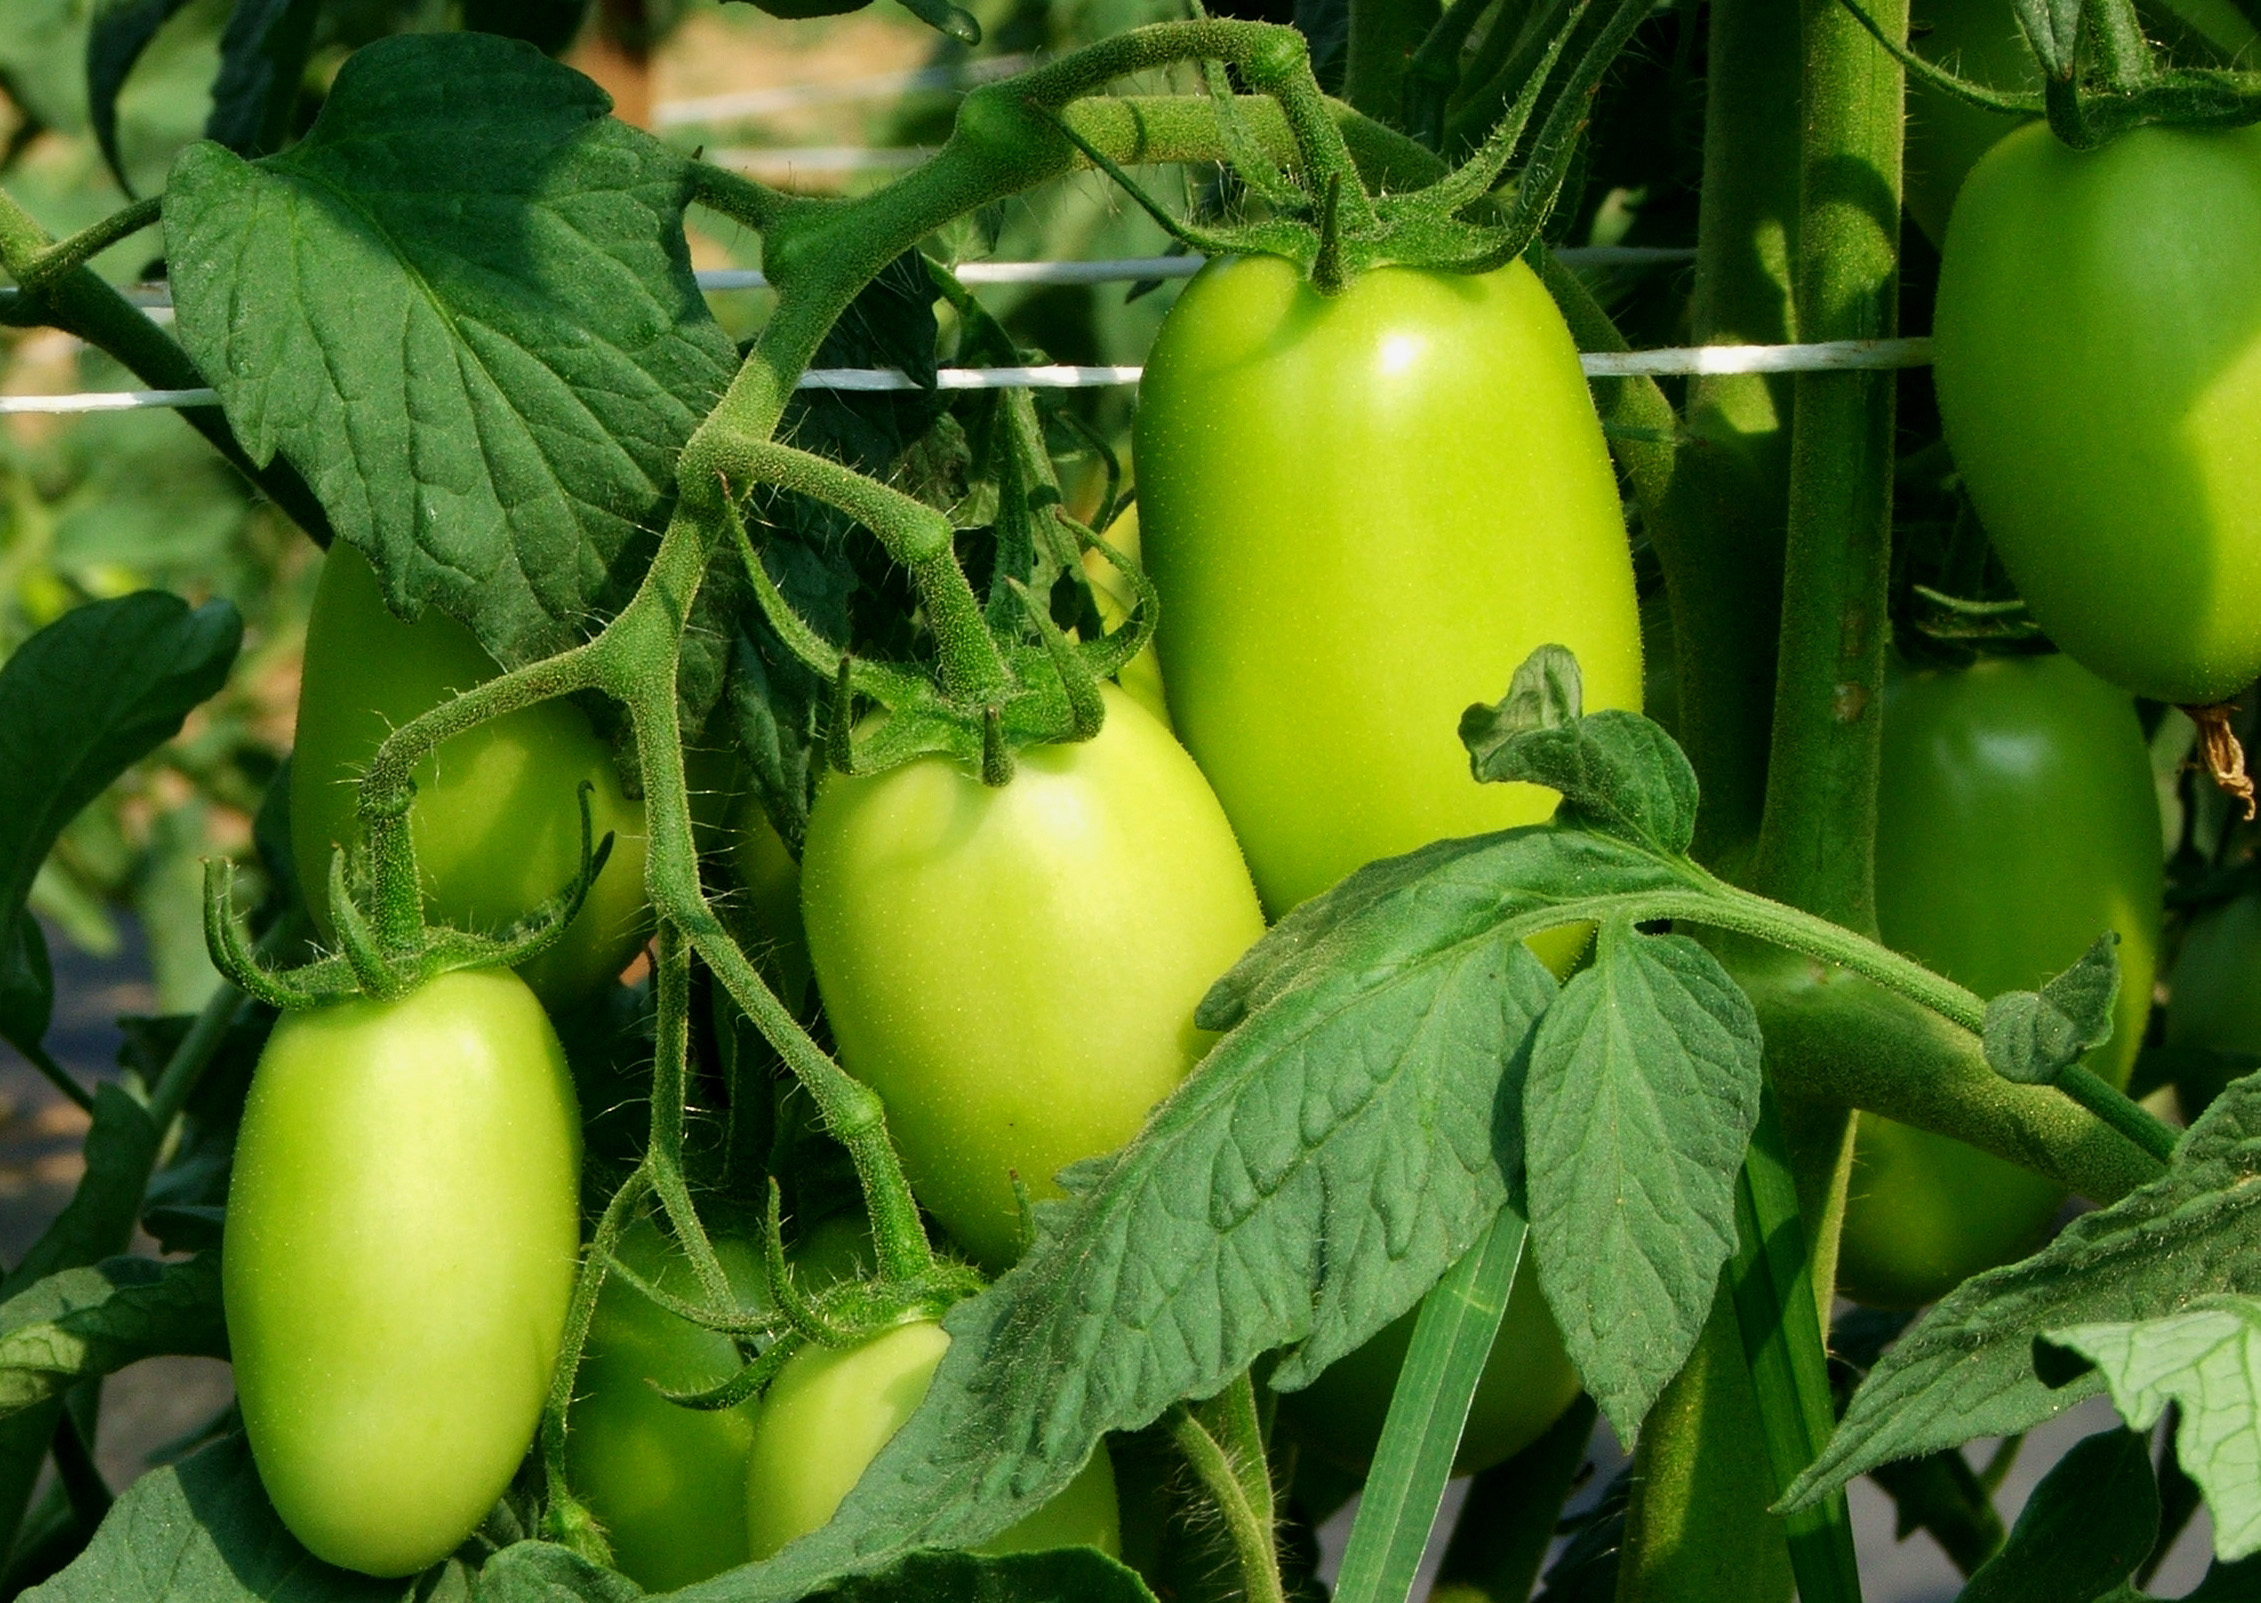 controling tomato pests and control